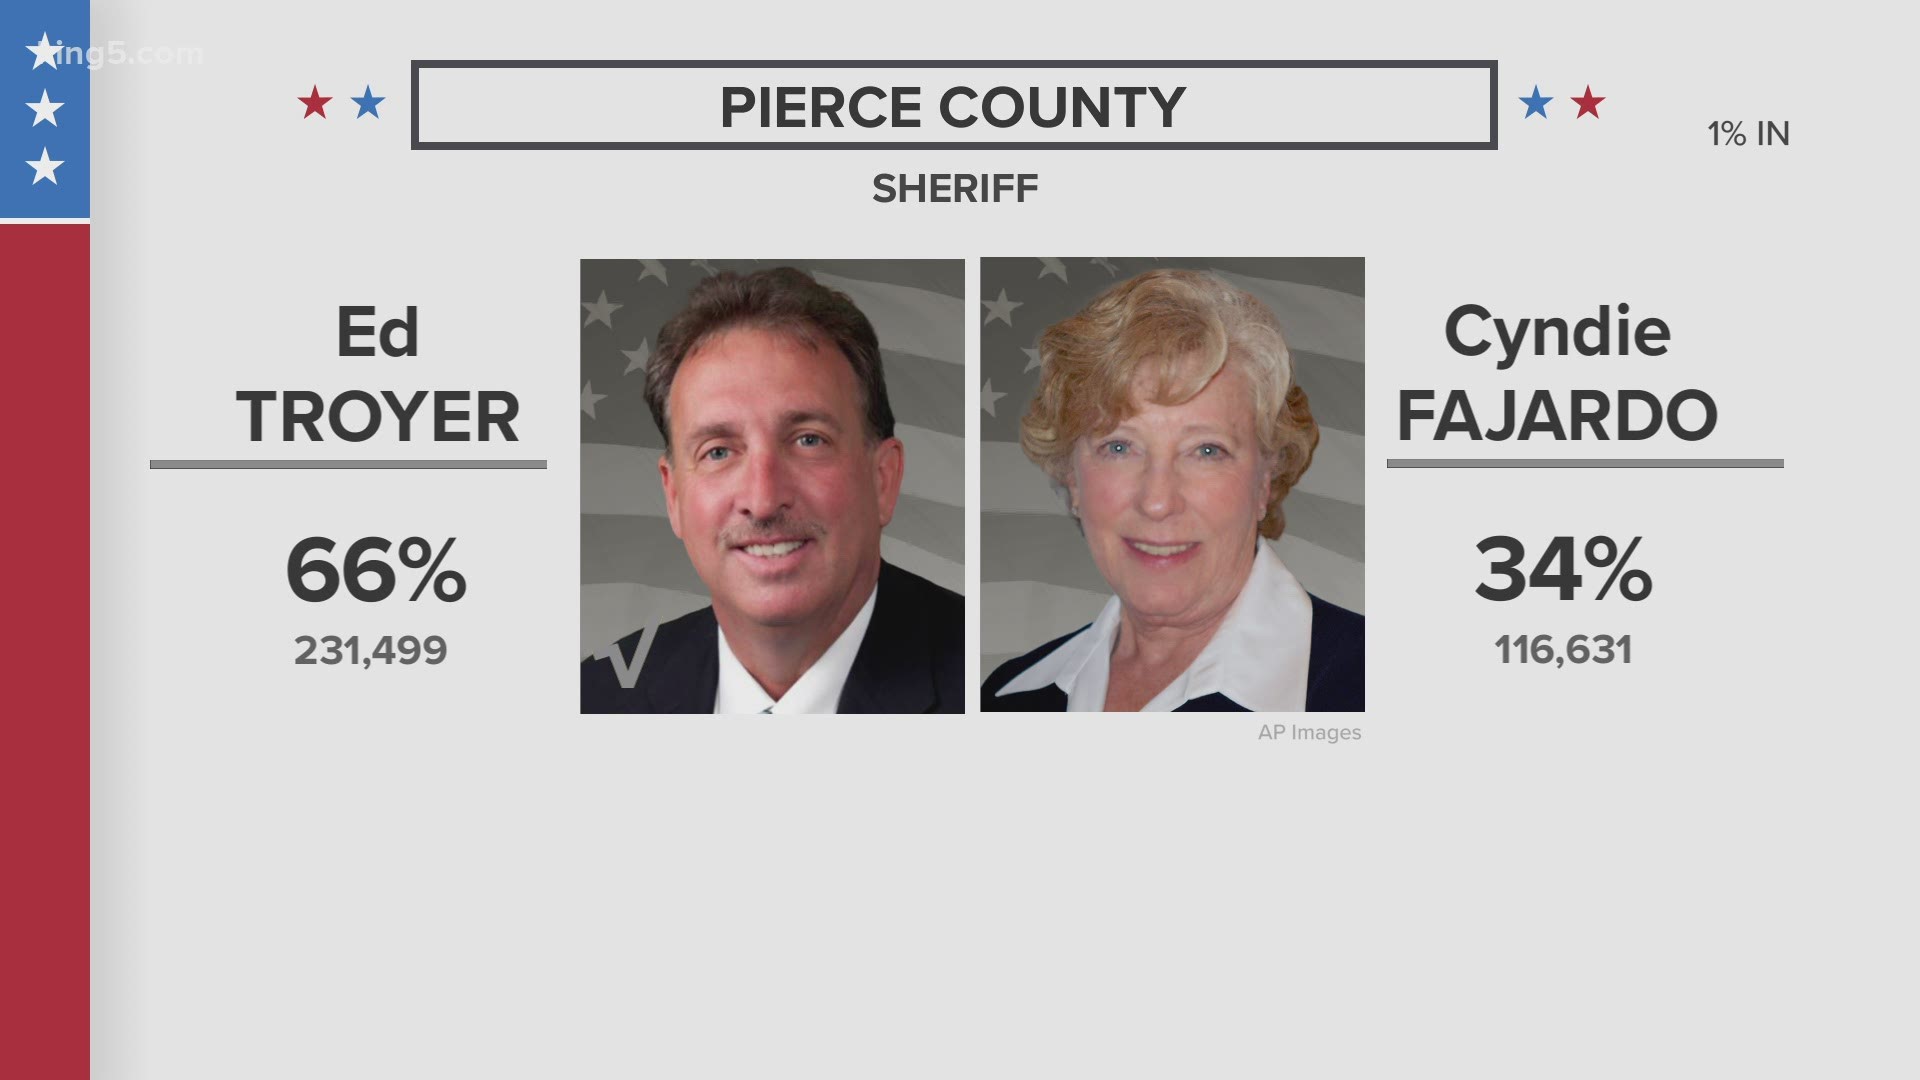 Current Pierce County Sheriff public information officer Ed Troyer (R) is has won the race for Pierce County Sheriff against Pierce County Lt. Sheriff Cyndie Fajardo